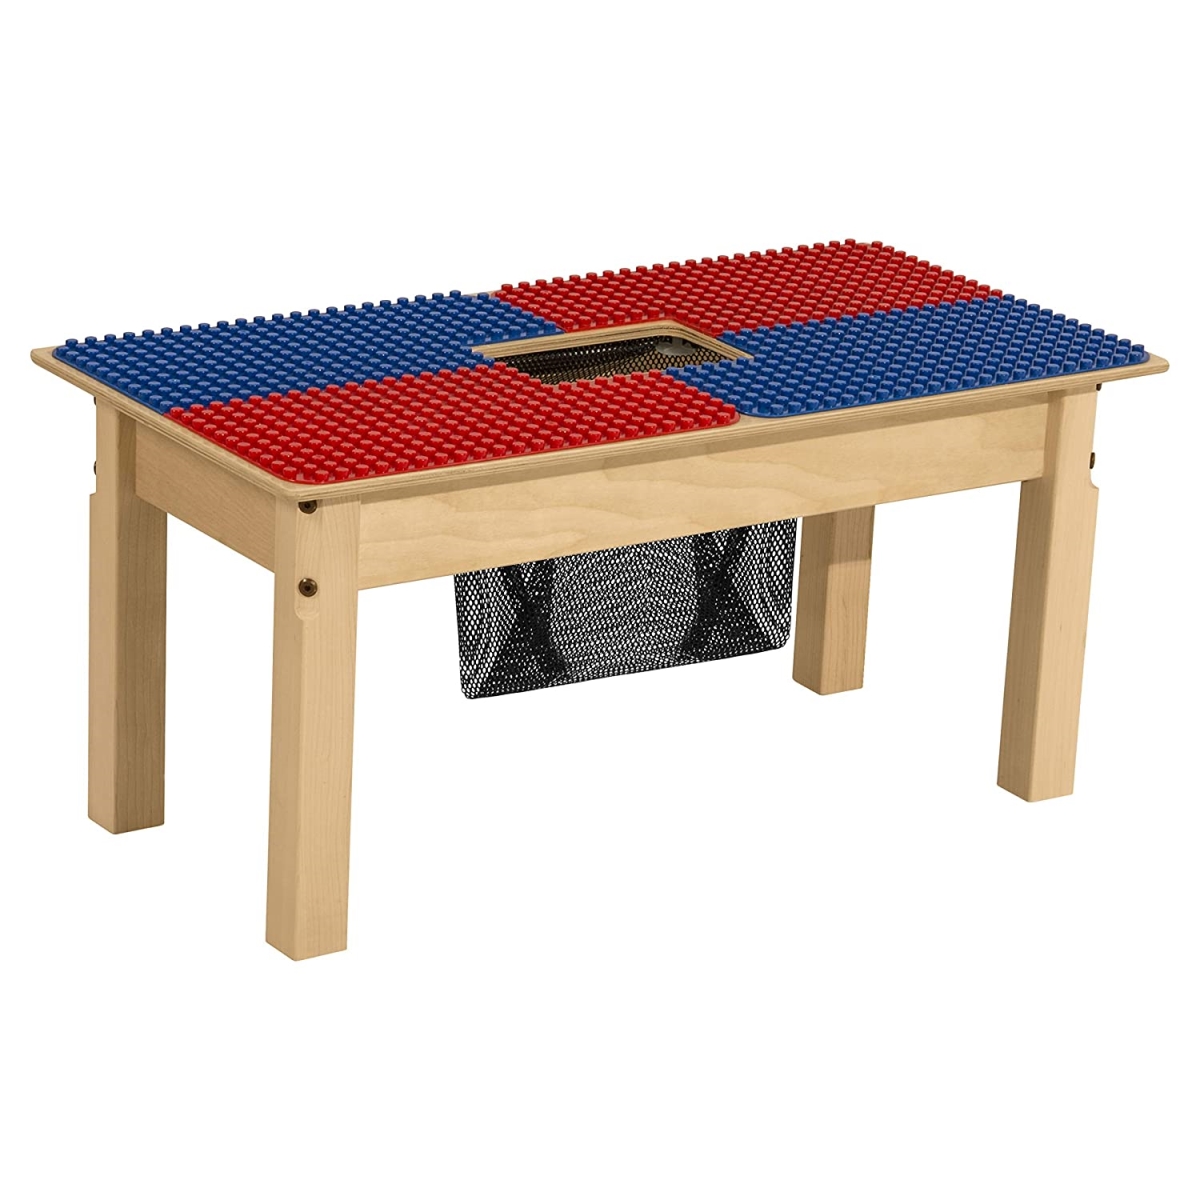 Tp1631pgn20-br 20 In. Duplo Compatible Table With Legs, Blue & Red - Square